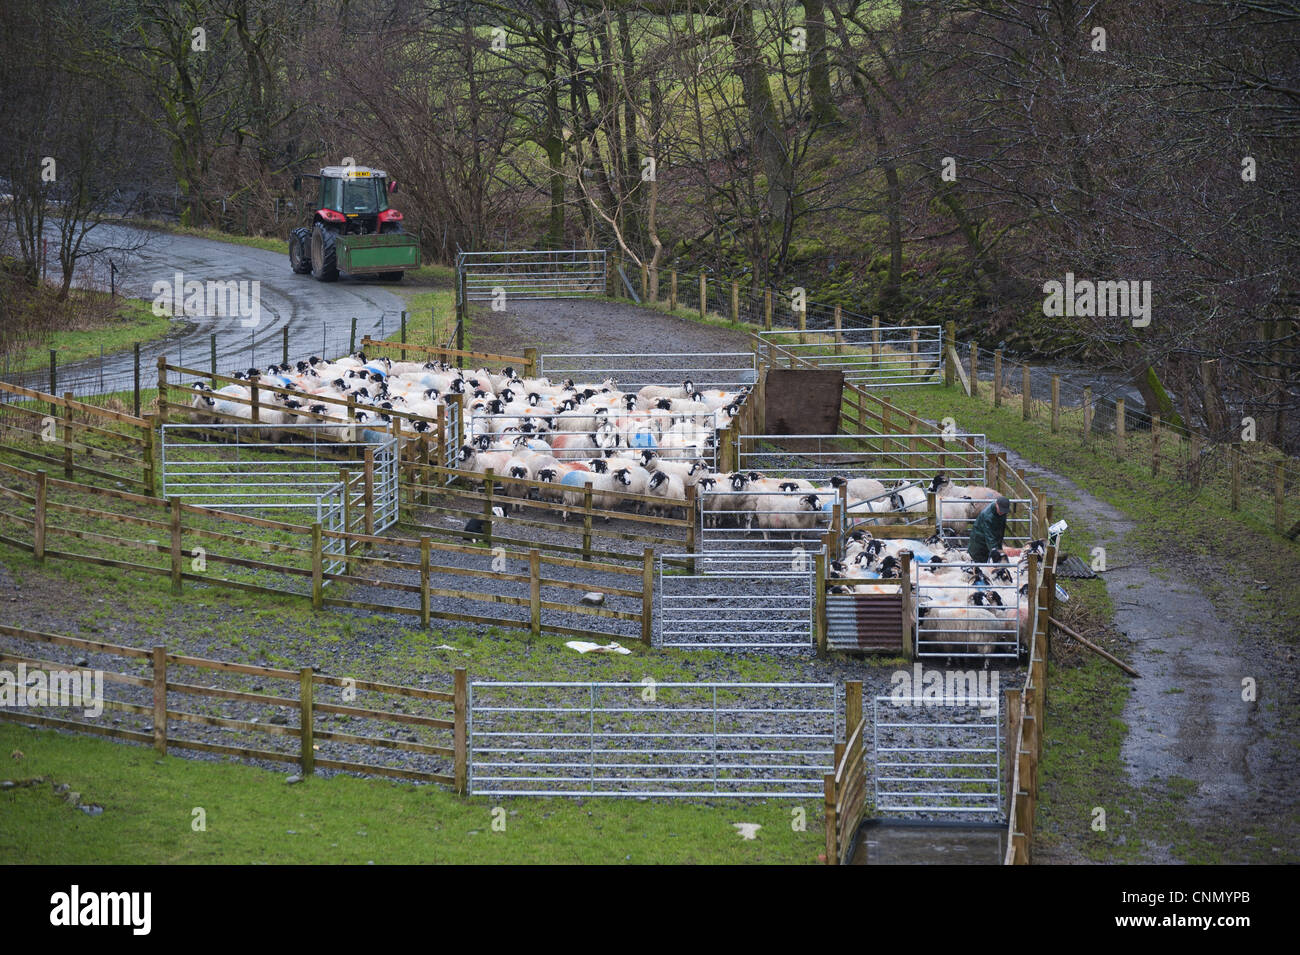 Domestic Sheep, Rough Fell ewes, flock gathered in pens, being drenched by farmer, Tebay, Cumbria, England, january Stock Photo